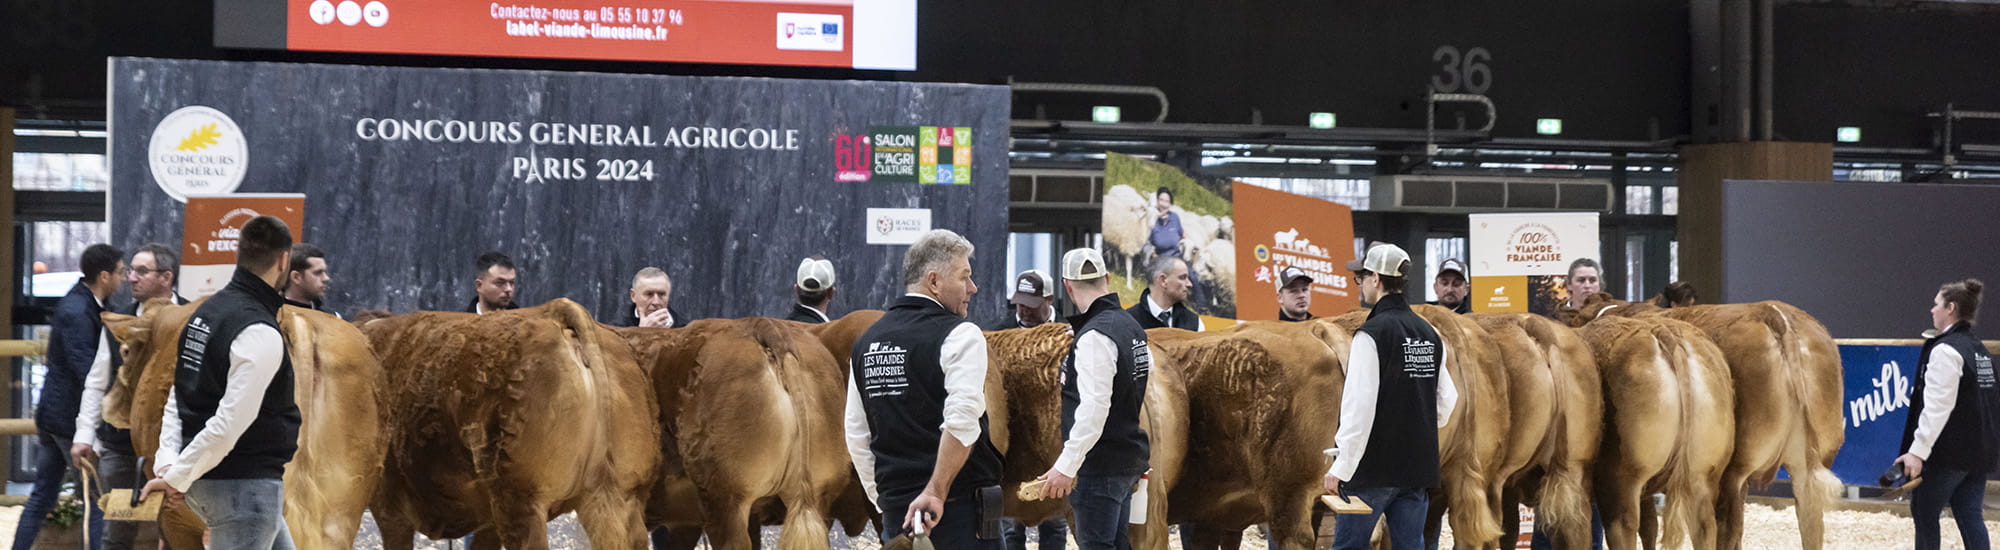 Cows presented at the 2024 agricultural competition